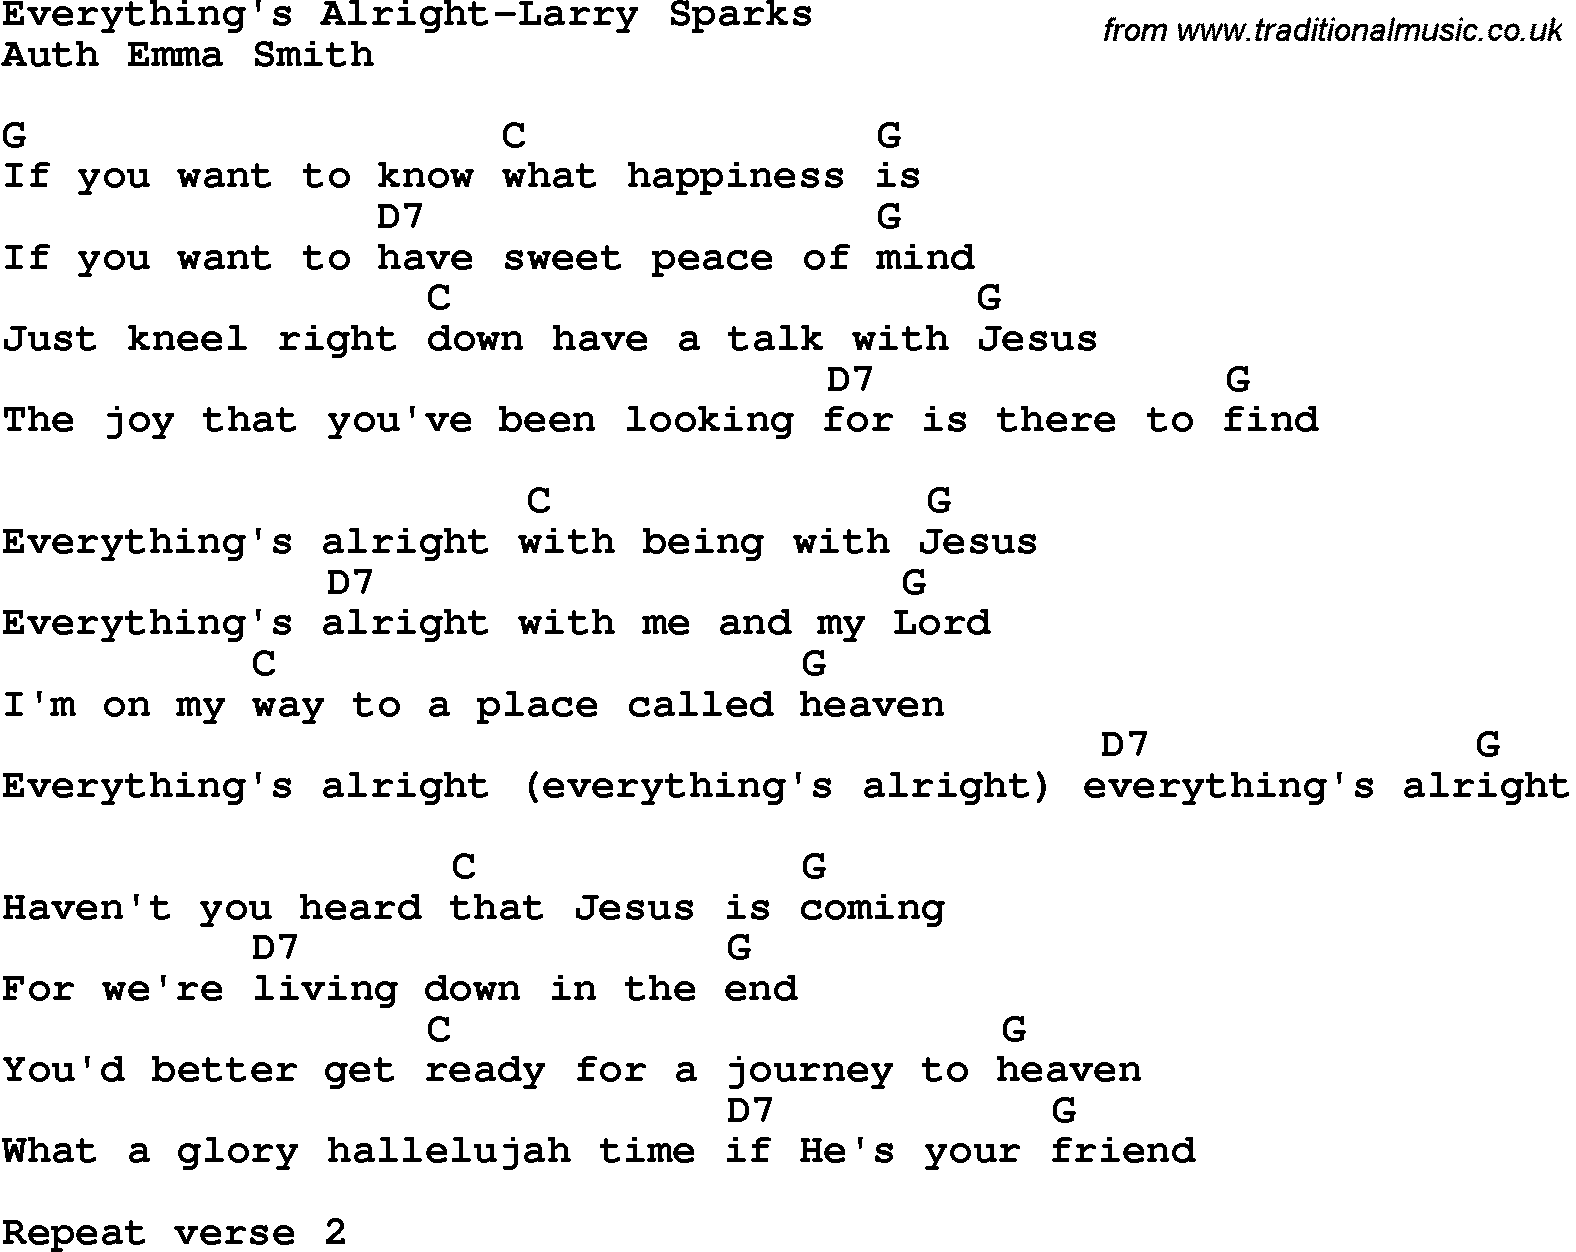 Country, Southern and Bluegrass Gospel Song Everything's Alright-Larry Sparks lyrics and chords